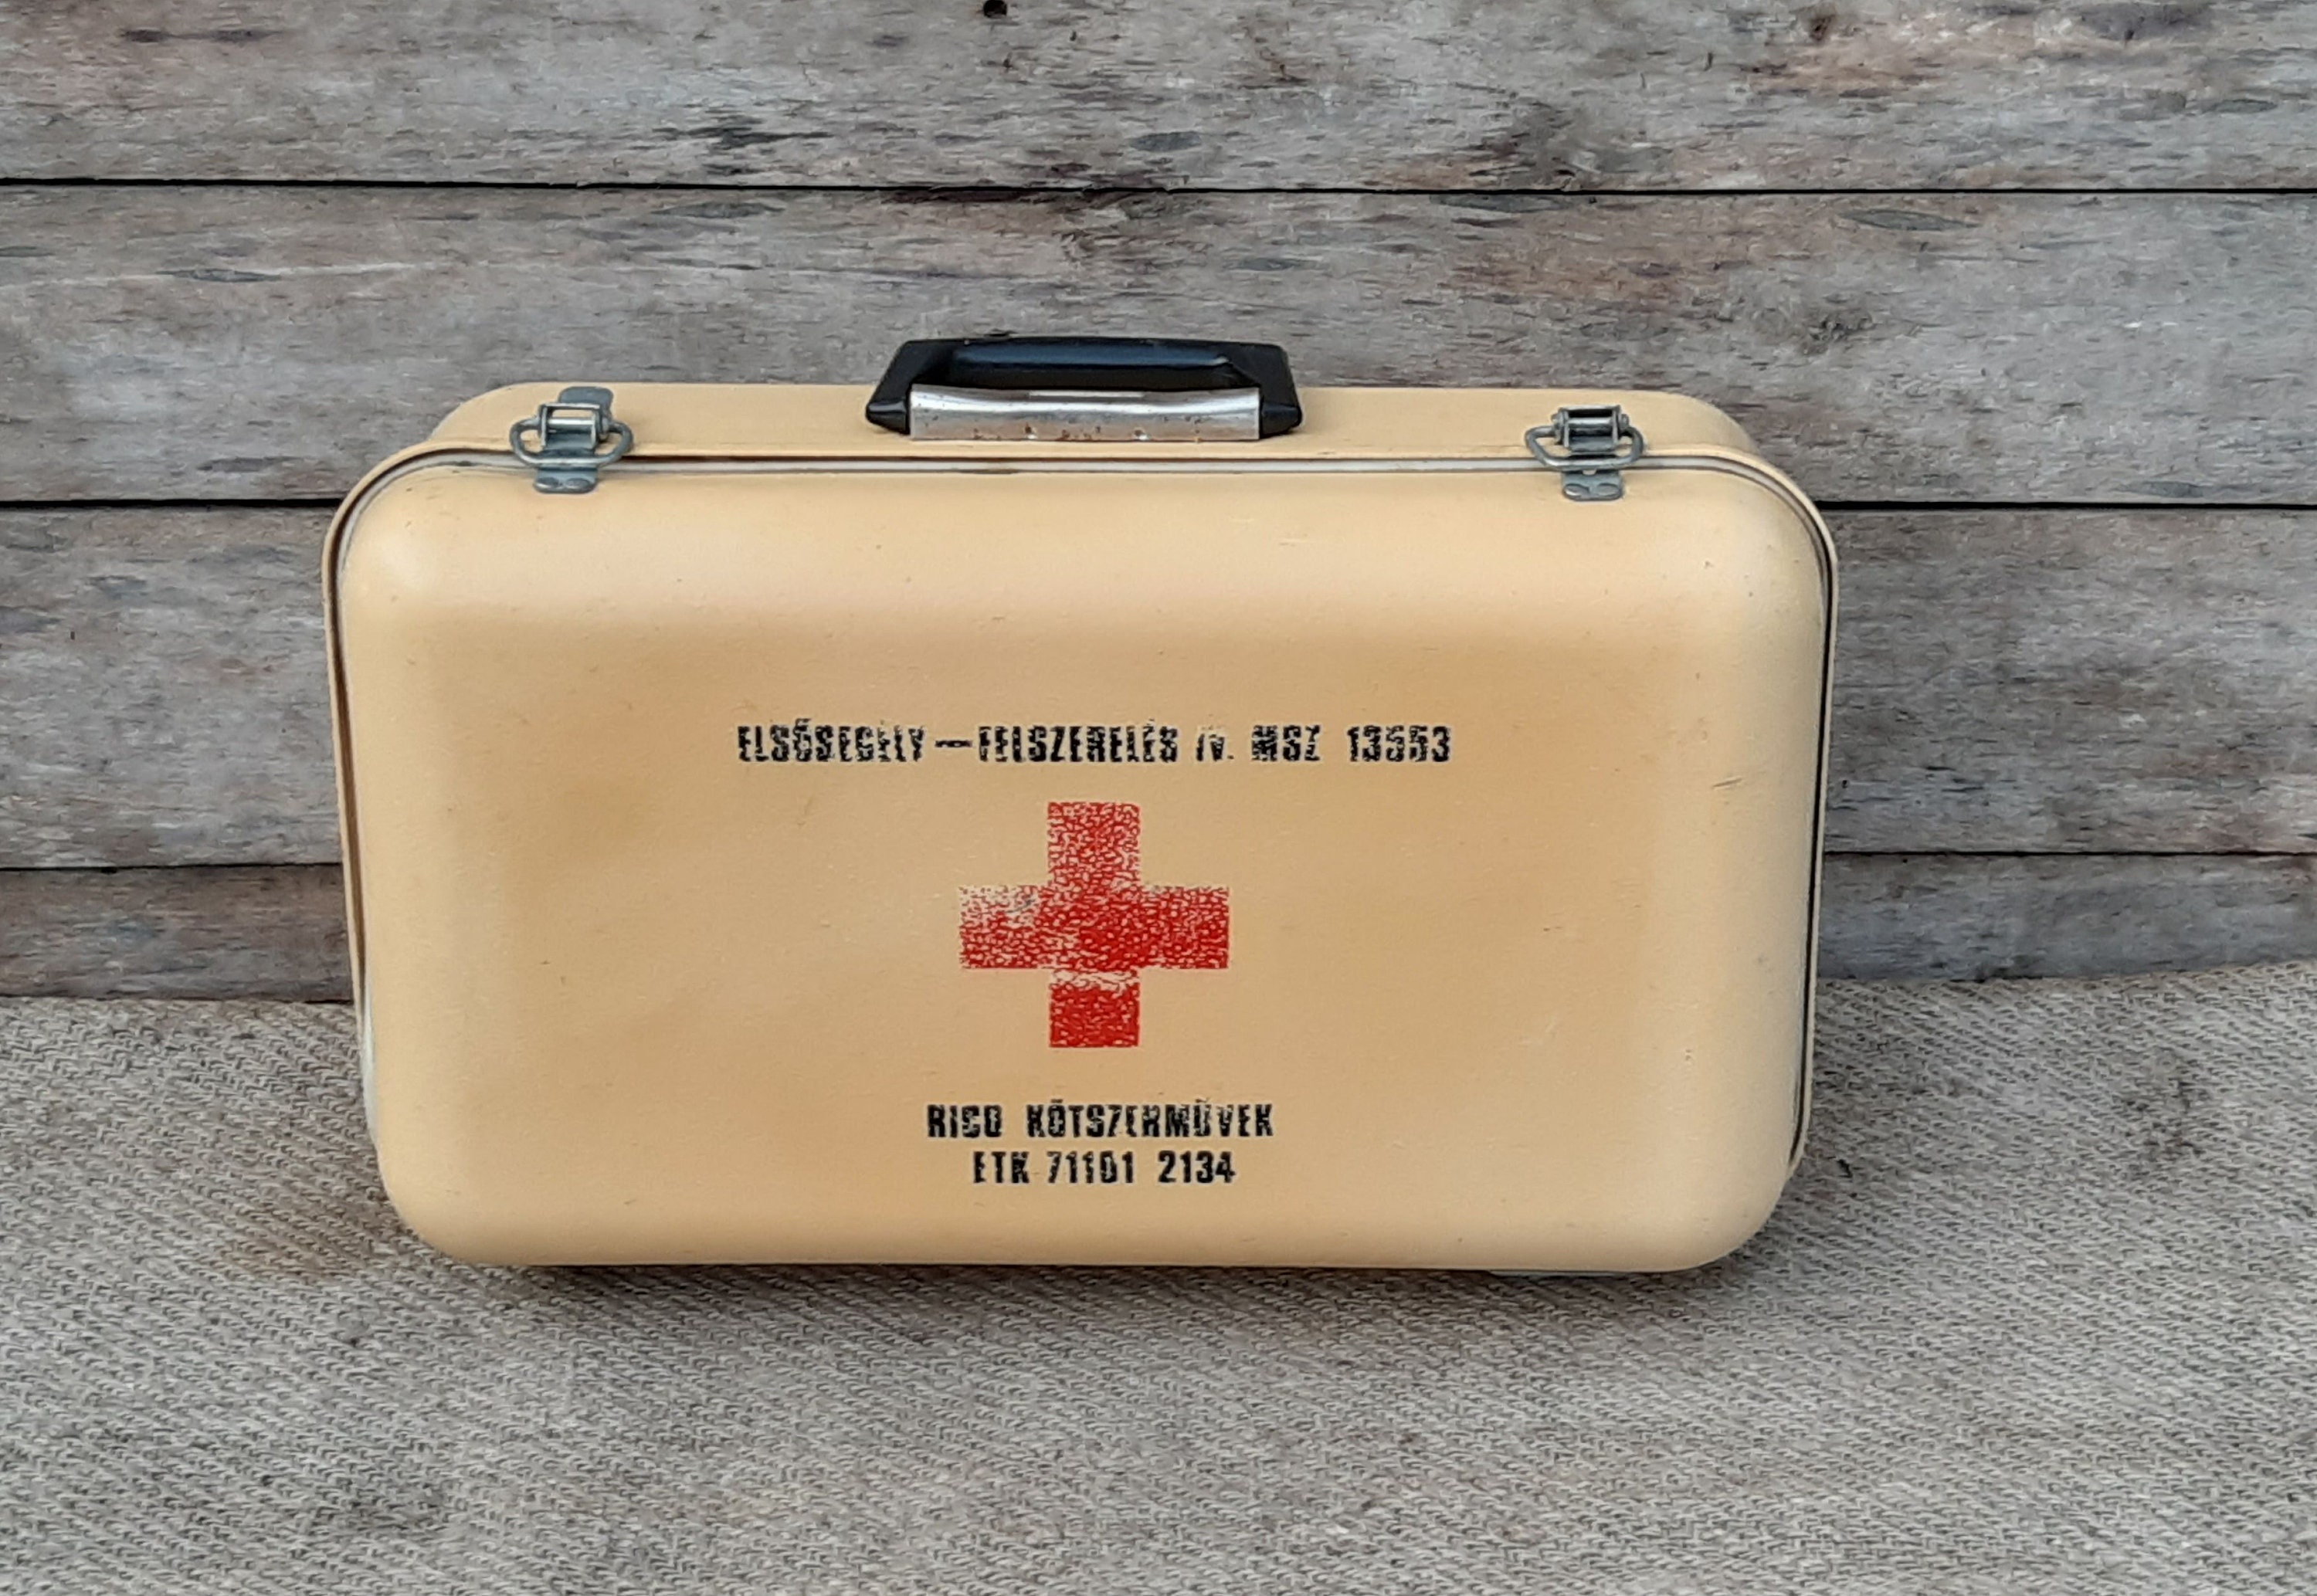 Vintage First Aid Box Red Cross Plastic Box Medical Soviet Box Medicine Box  Pharmacy Healthcare Workers Gift First Aid Caddy Doctor Gift 